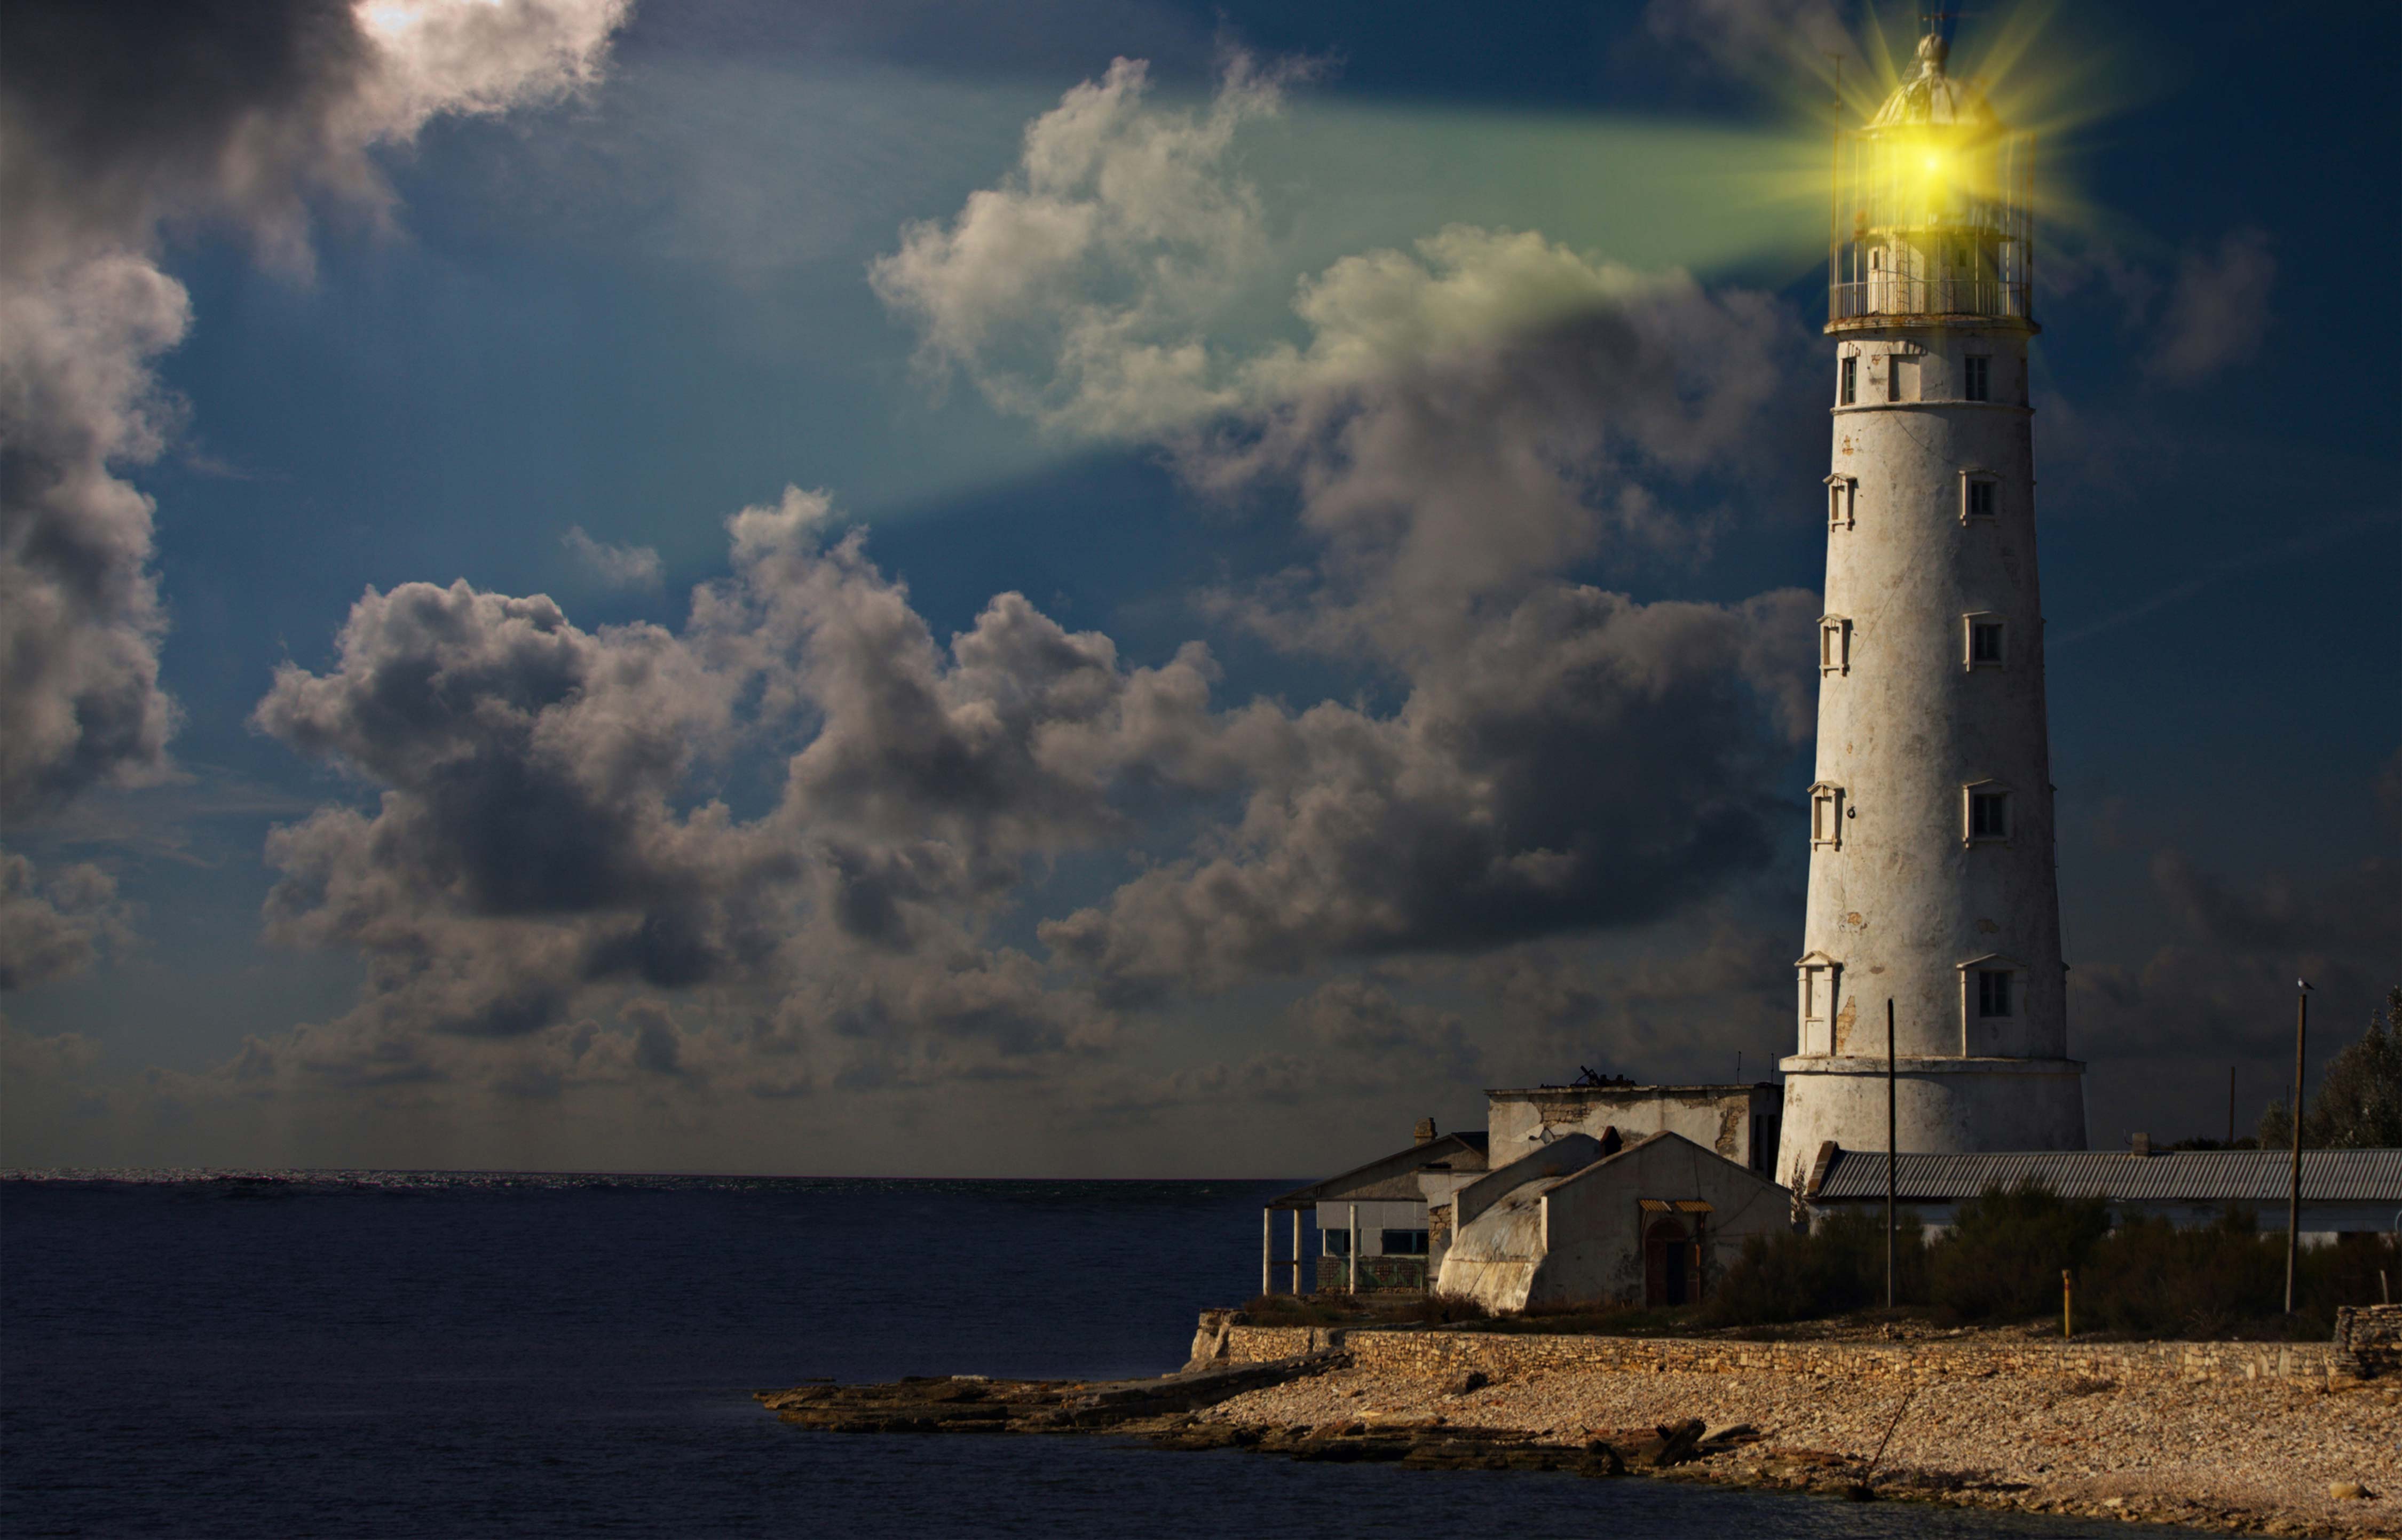 4k Lighthouse Wallpapers Top Free 4k Lighthouse Backgrounds Images, Photos, Reviews